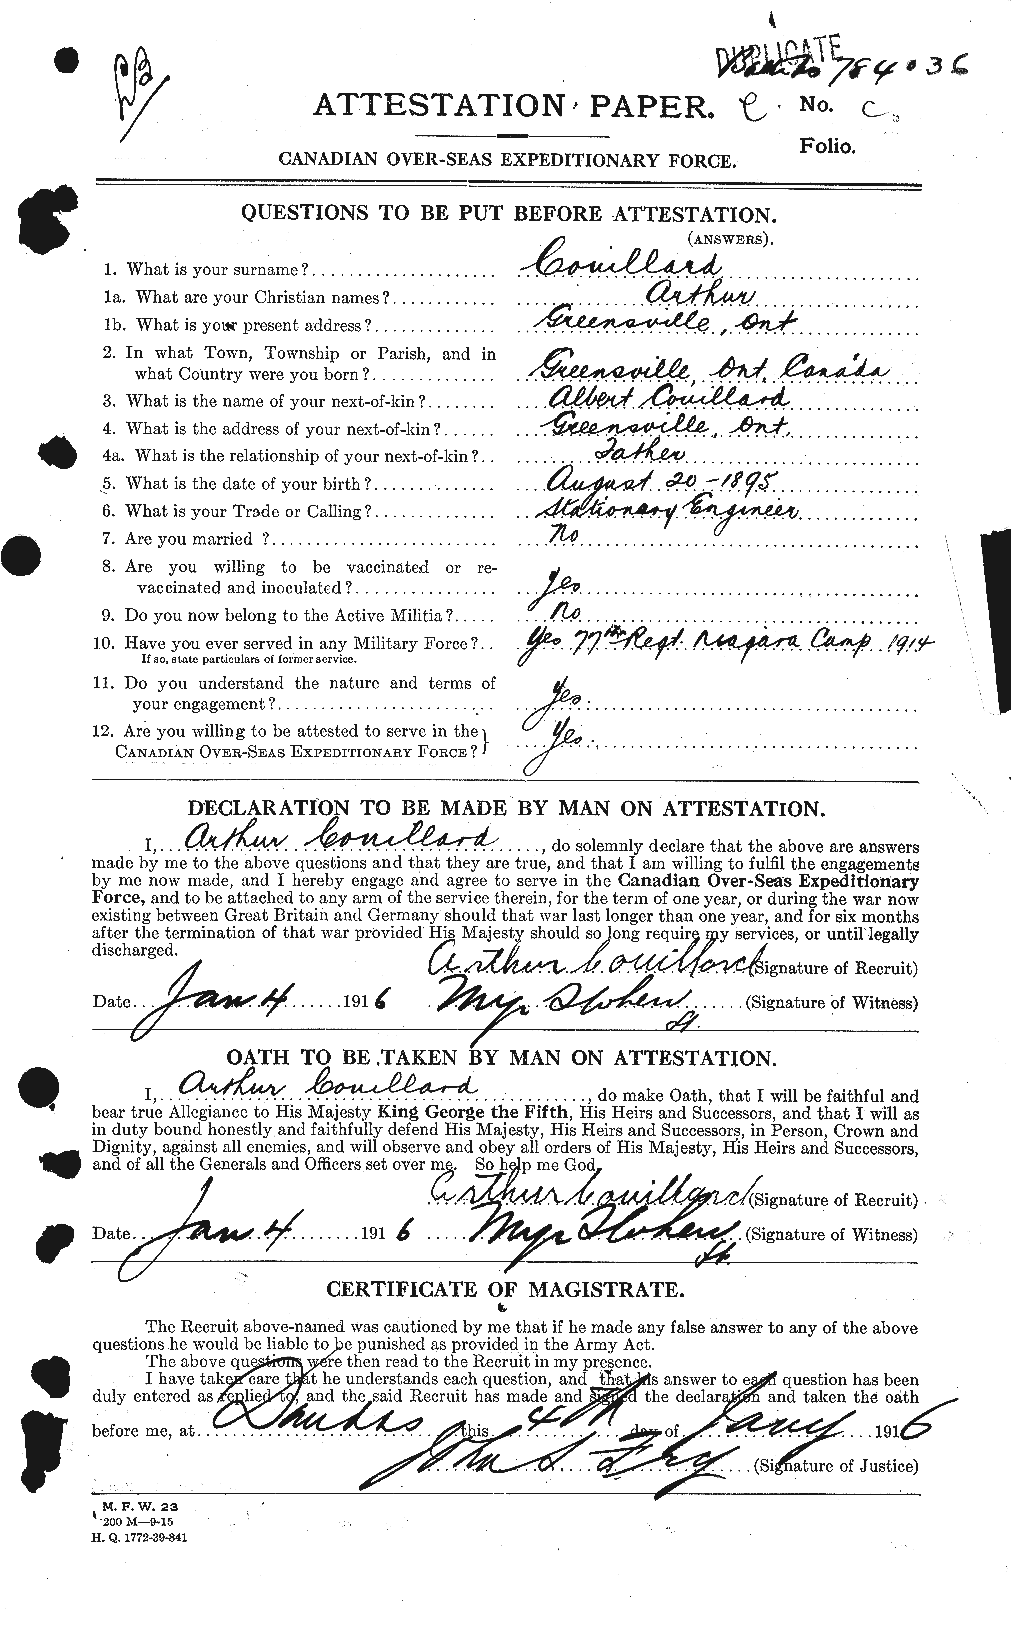 Personnel Records of the First World War - CEF 057383a